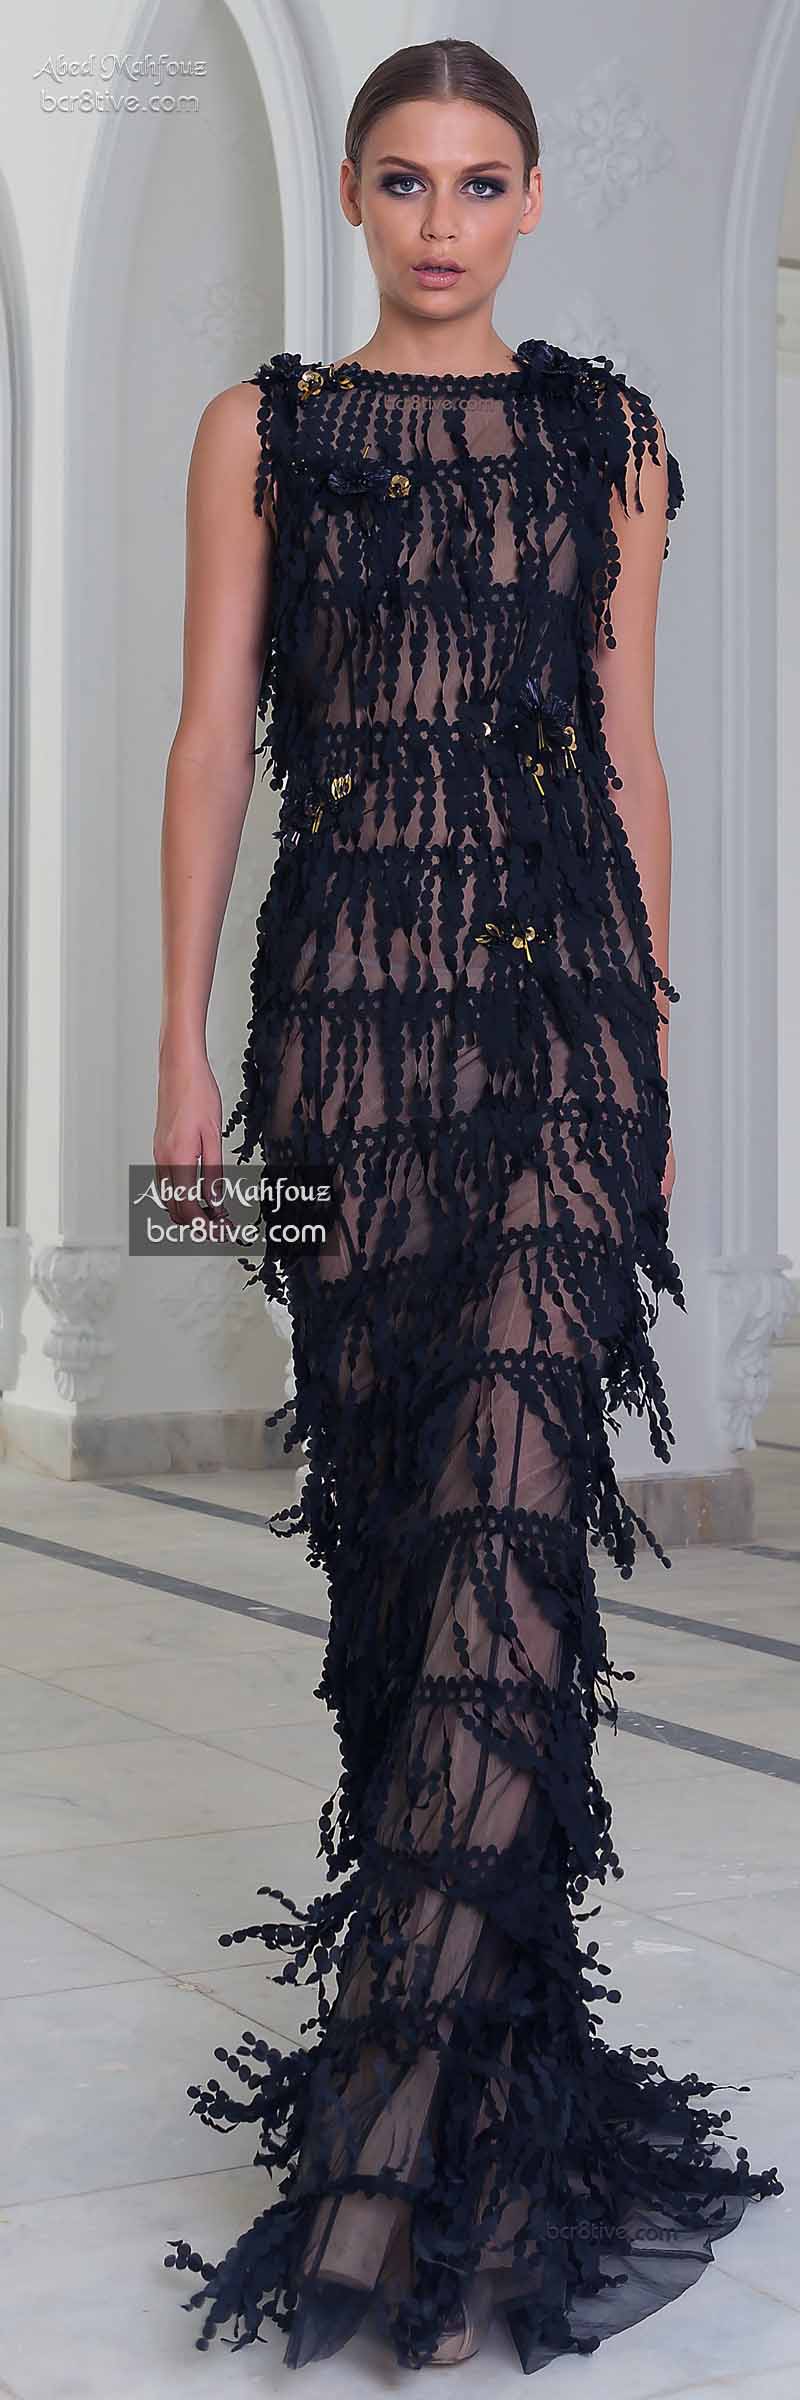 Abed Mahfouz Fall Winter 2014-15 Couture – Winter Bliss – Be Creative